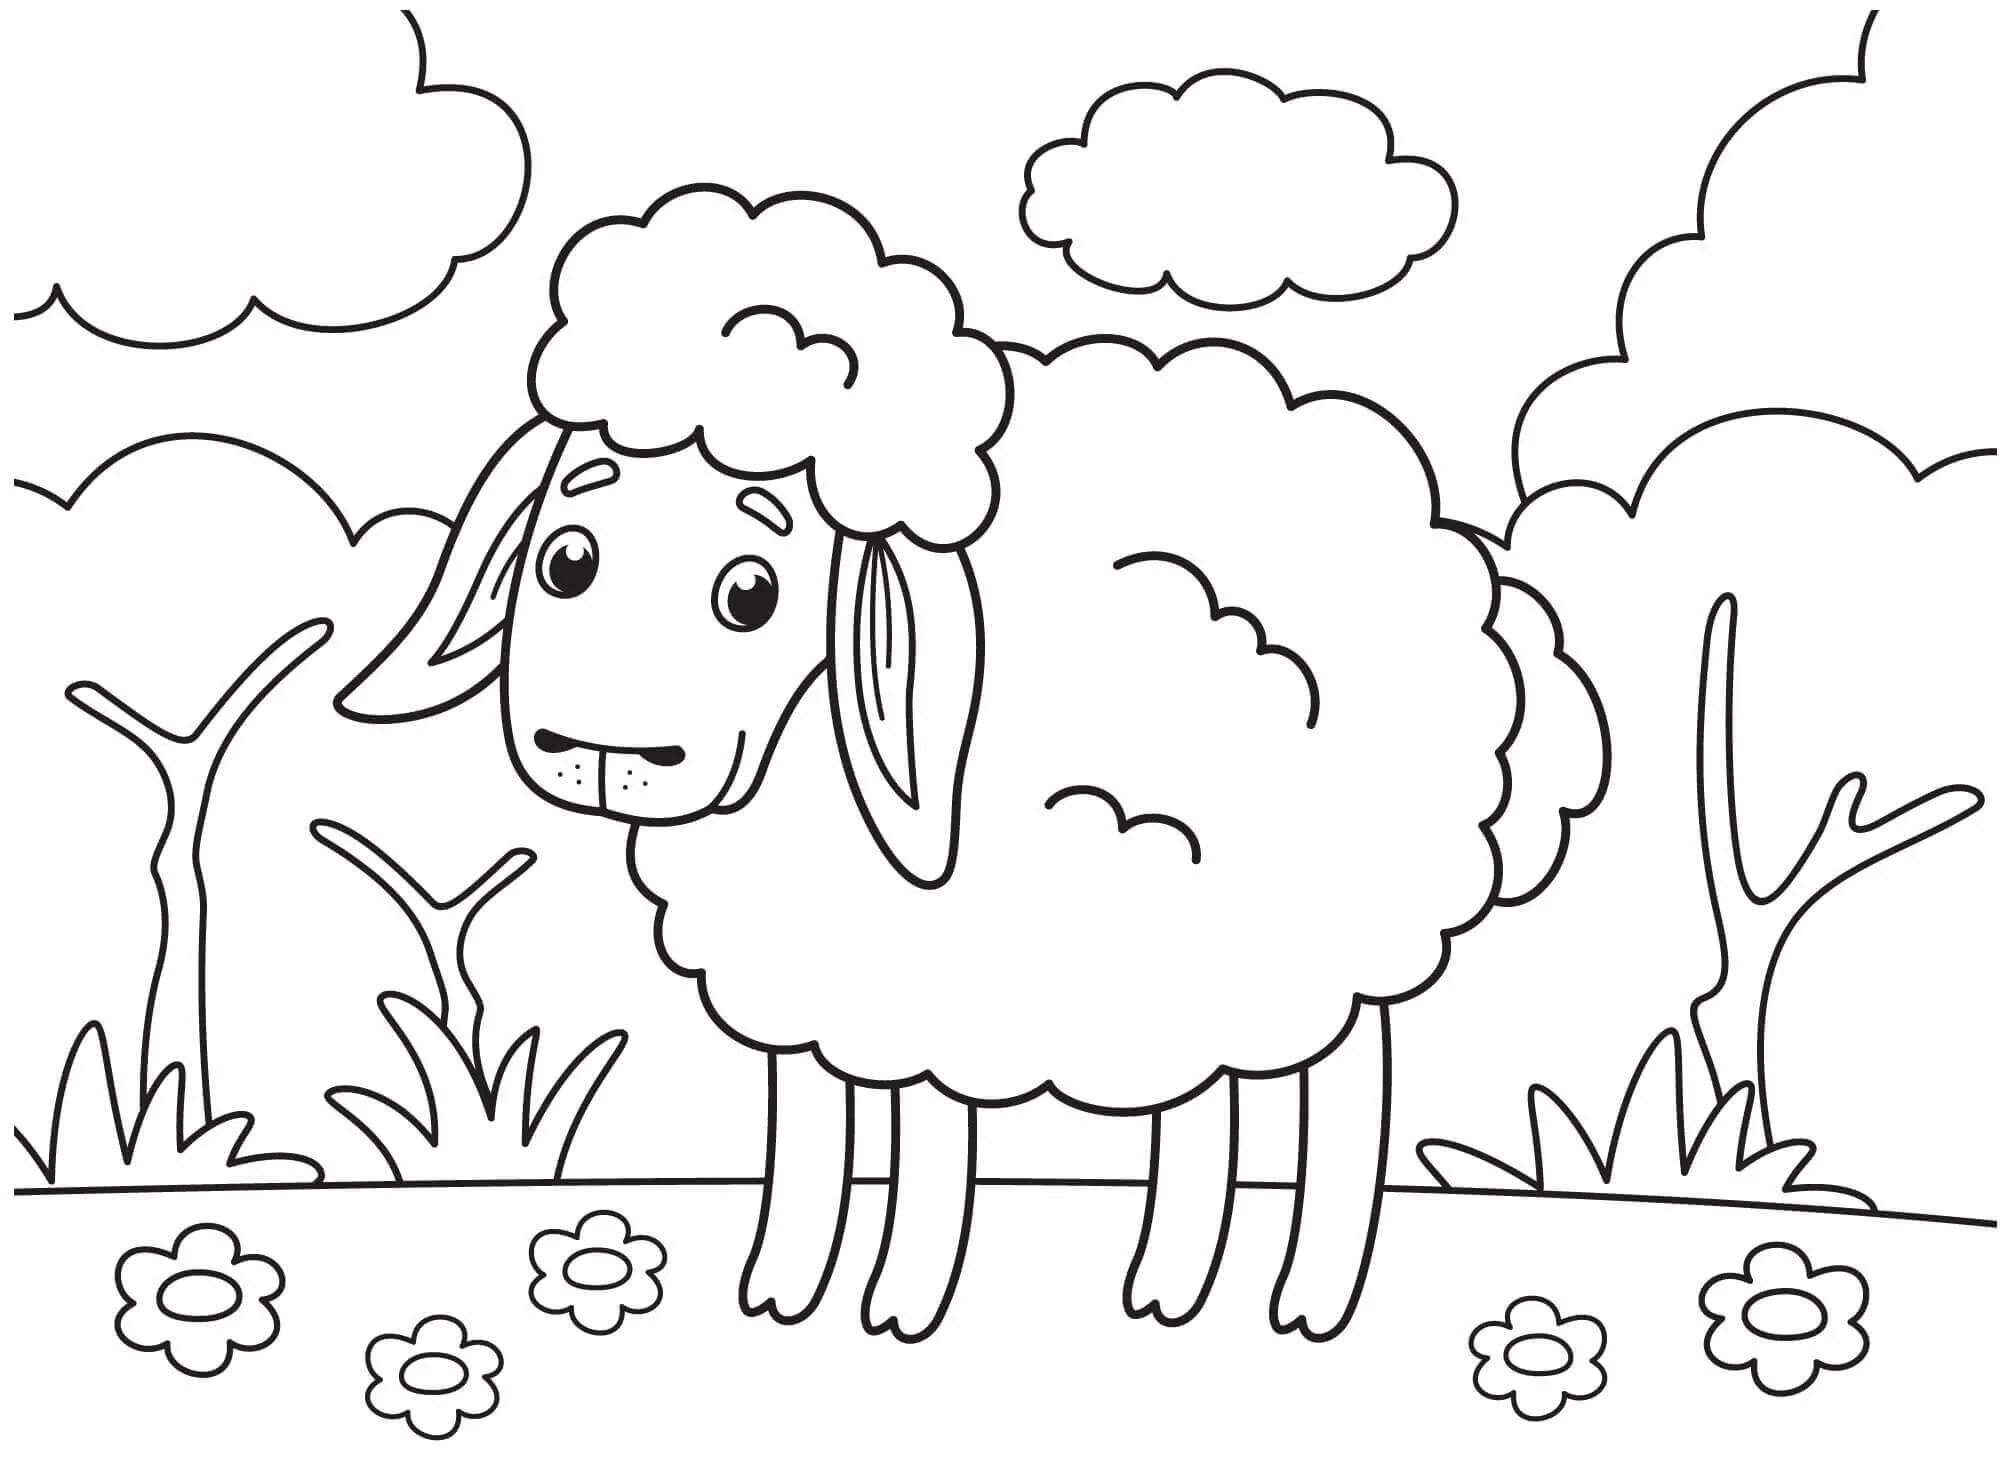 Colorful and delightful coloring of sheep for children 5-6 years old